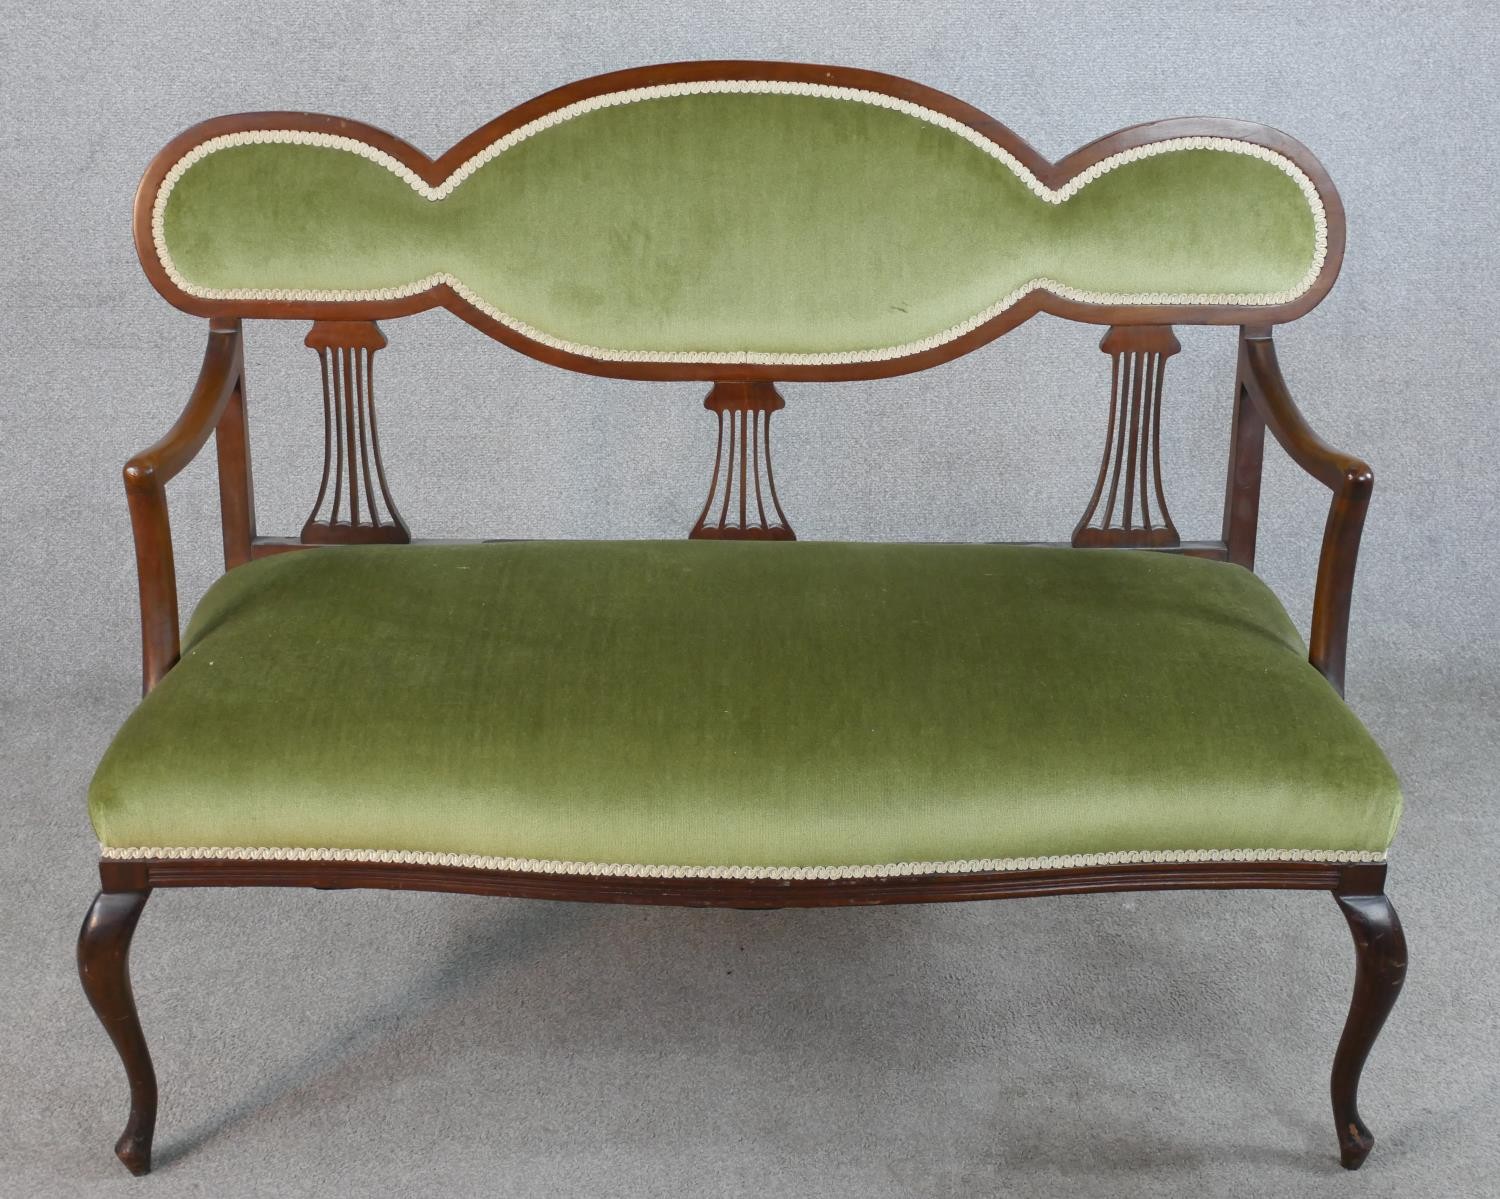 An Edwardian mahogany framed open arm settee with pierced splat back, with green upholstered seat